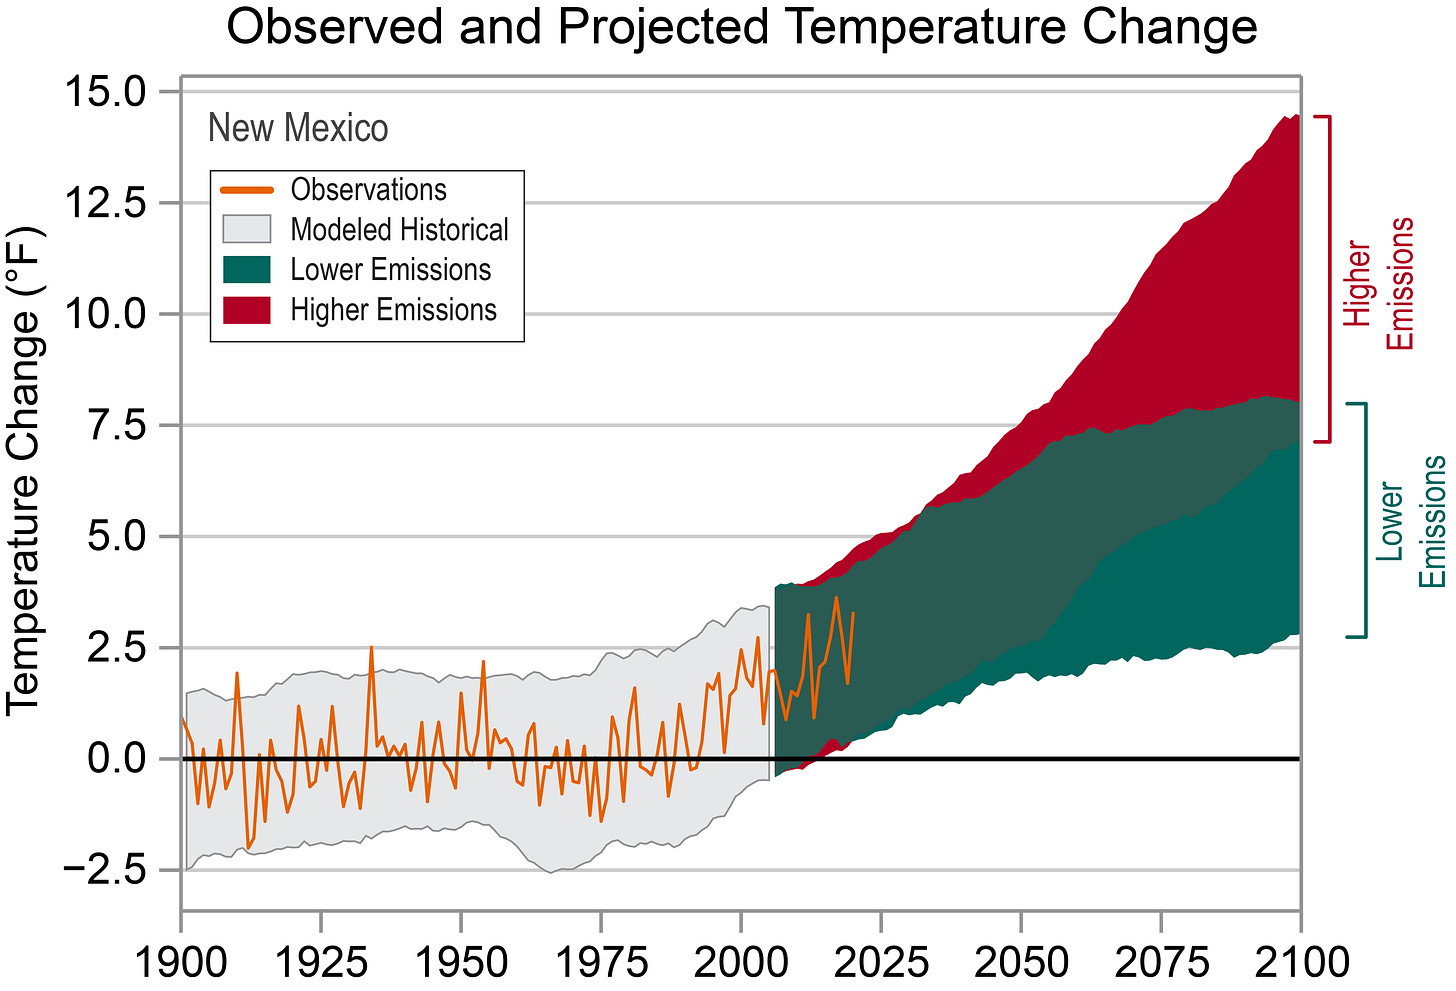 Observed and Projected Temperature Change